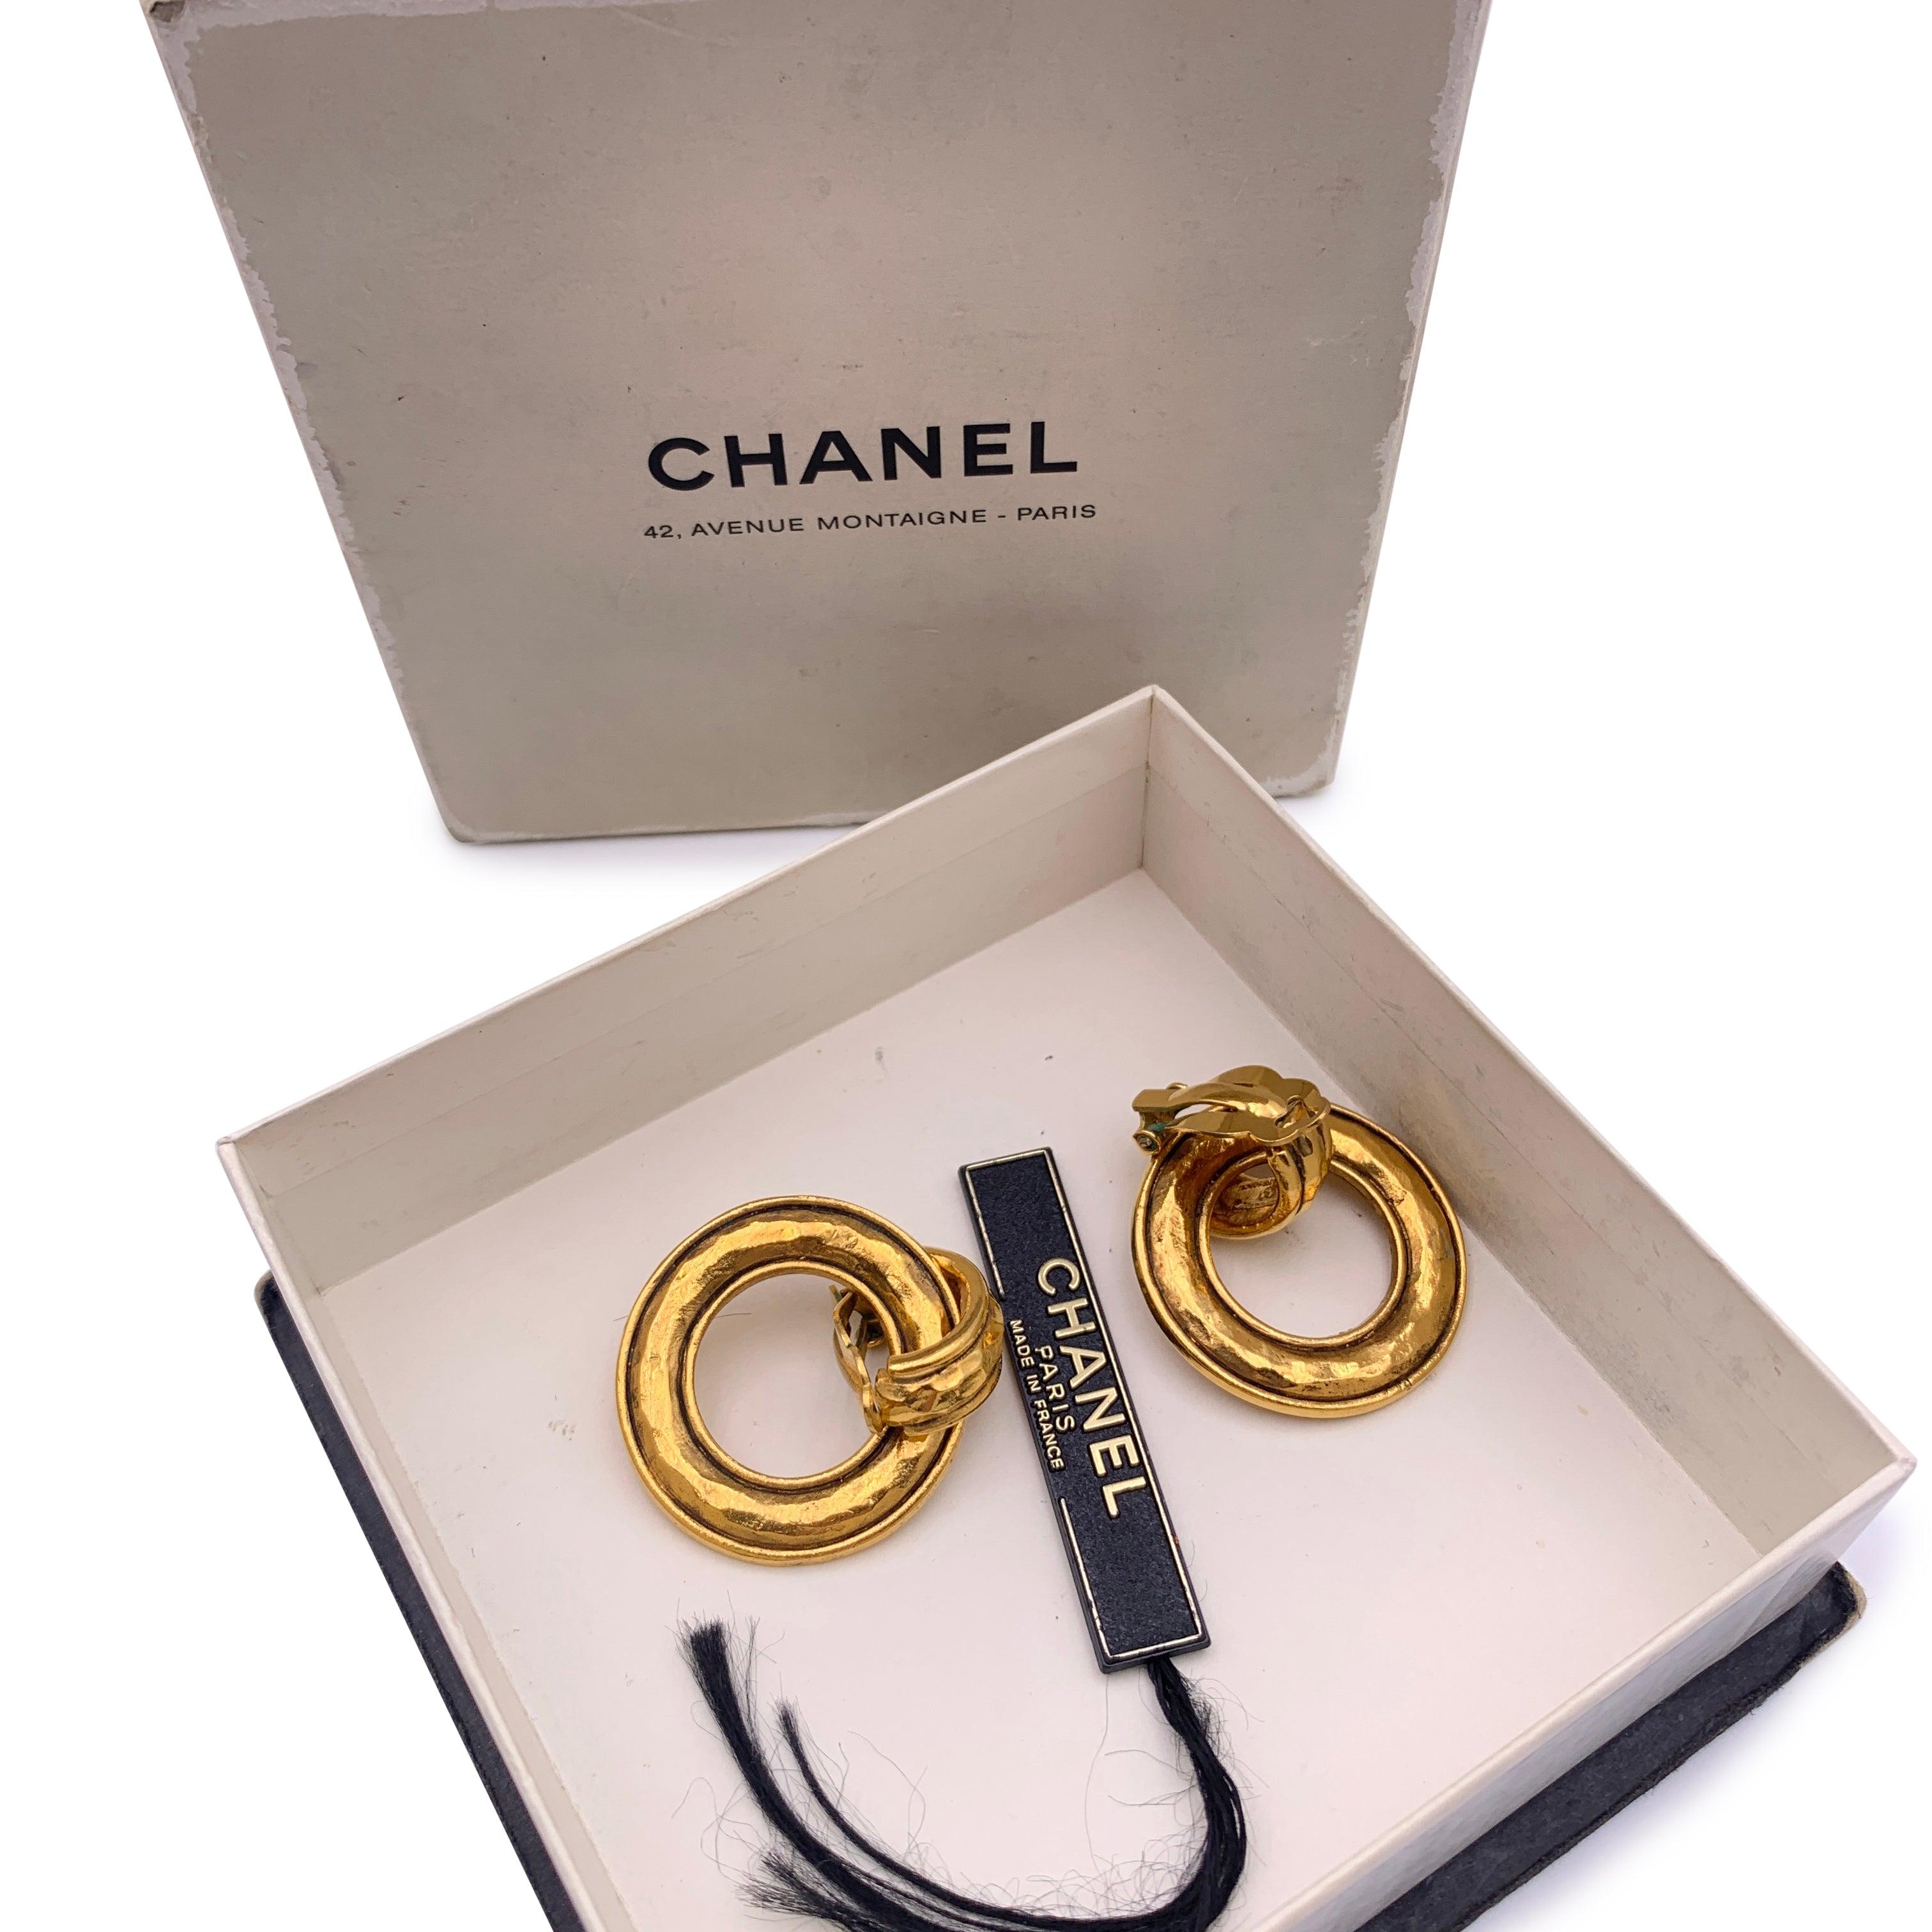 Beautiful vintage clip on door knocker earrings by CHANEL. They are finely crafted in gold metal. Can be used in 2 different way, if you remove the hoop. Clip on closure on the back. 'CHANEL - CC - Made in France' oval tag on the reverse of the